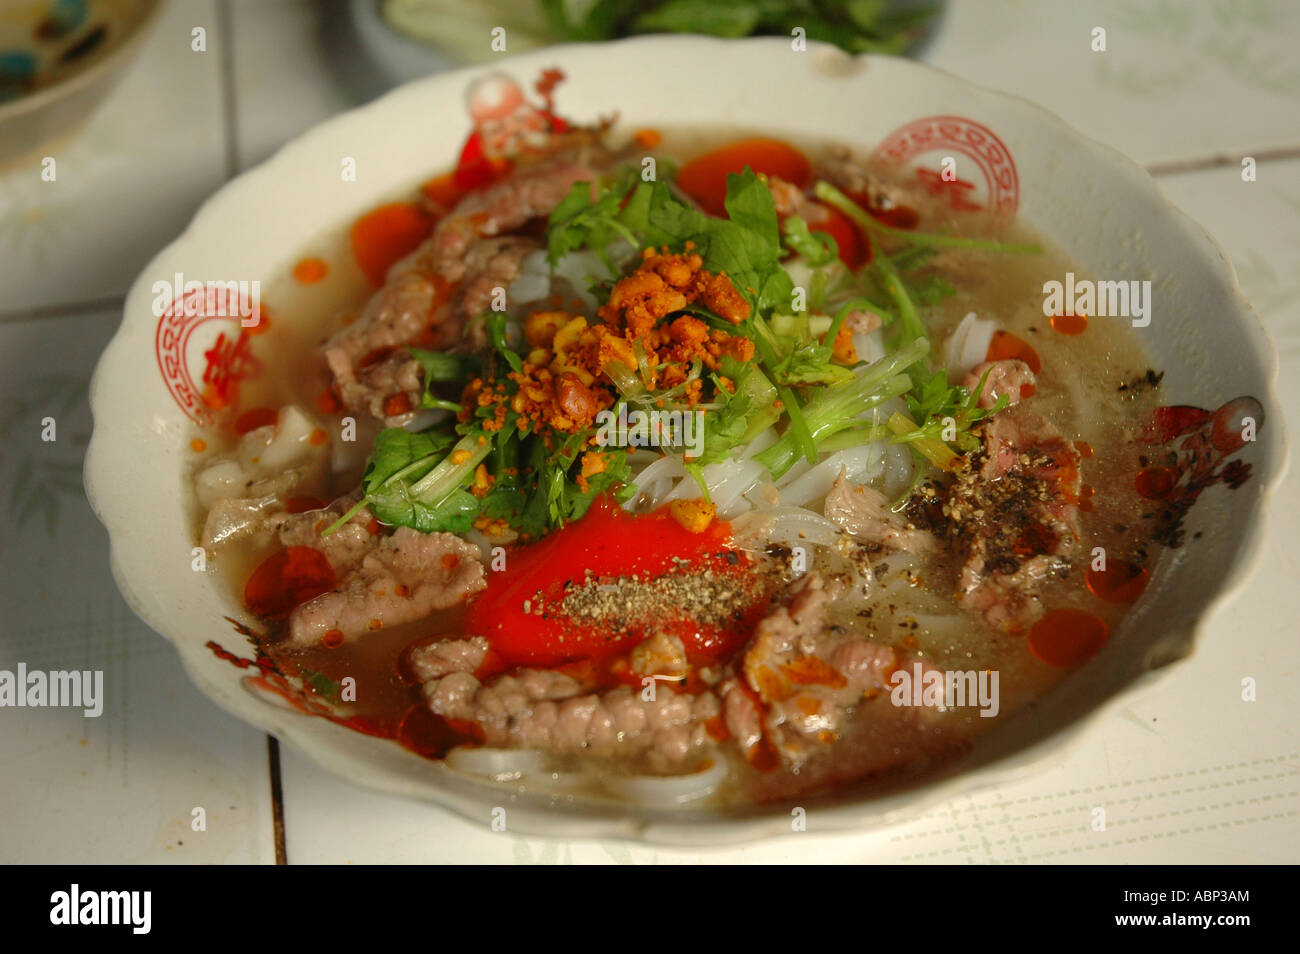 A bowl of pho bo from a market stall in Hoi An, central coast Vietnam. Stock Photo